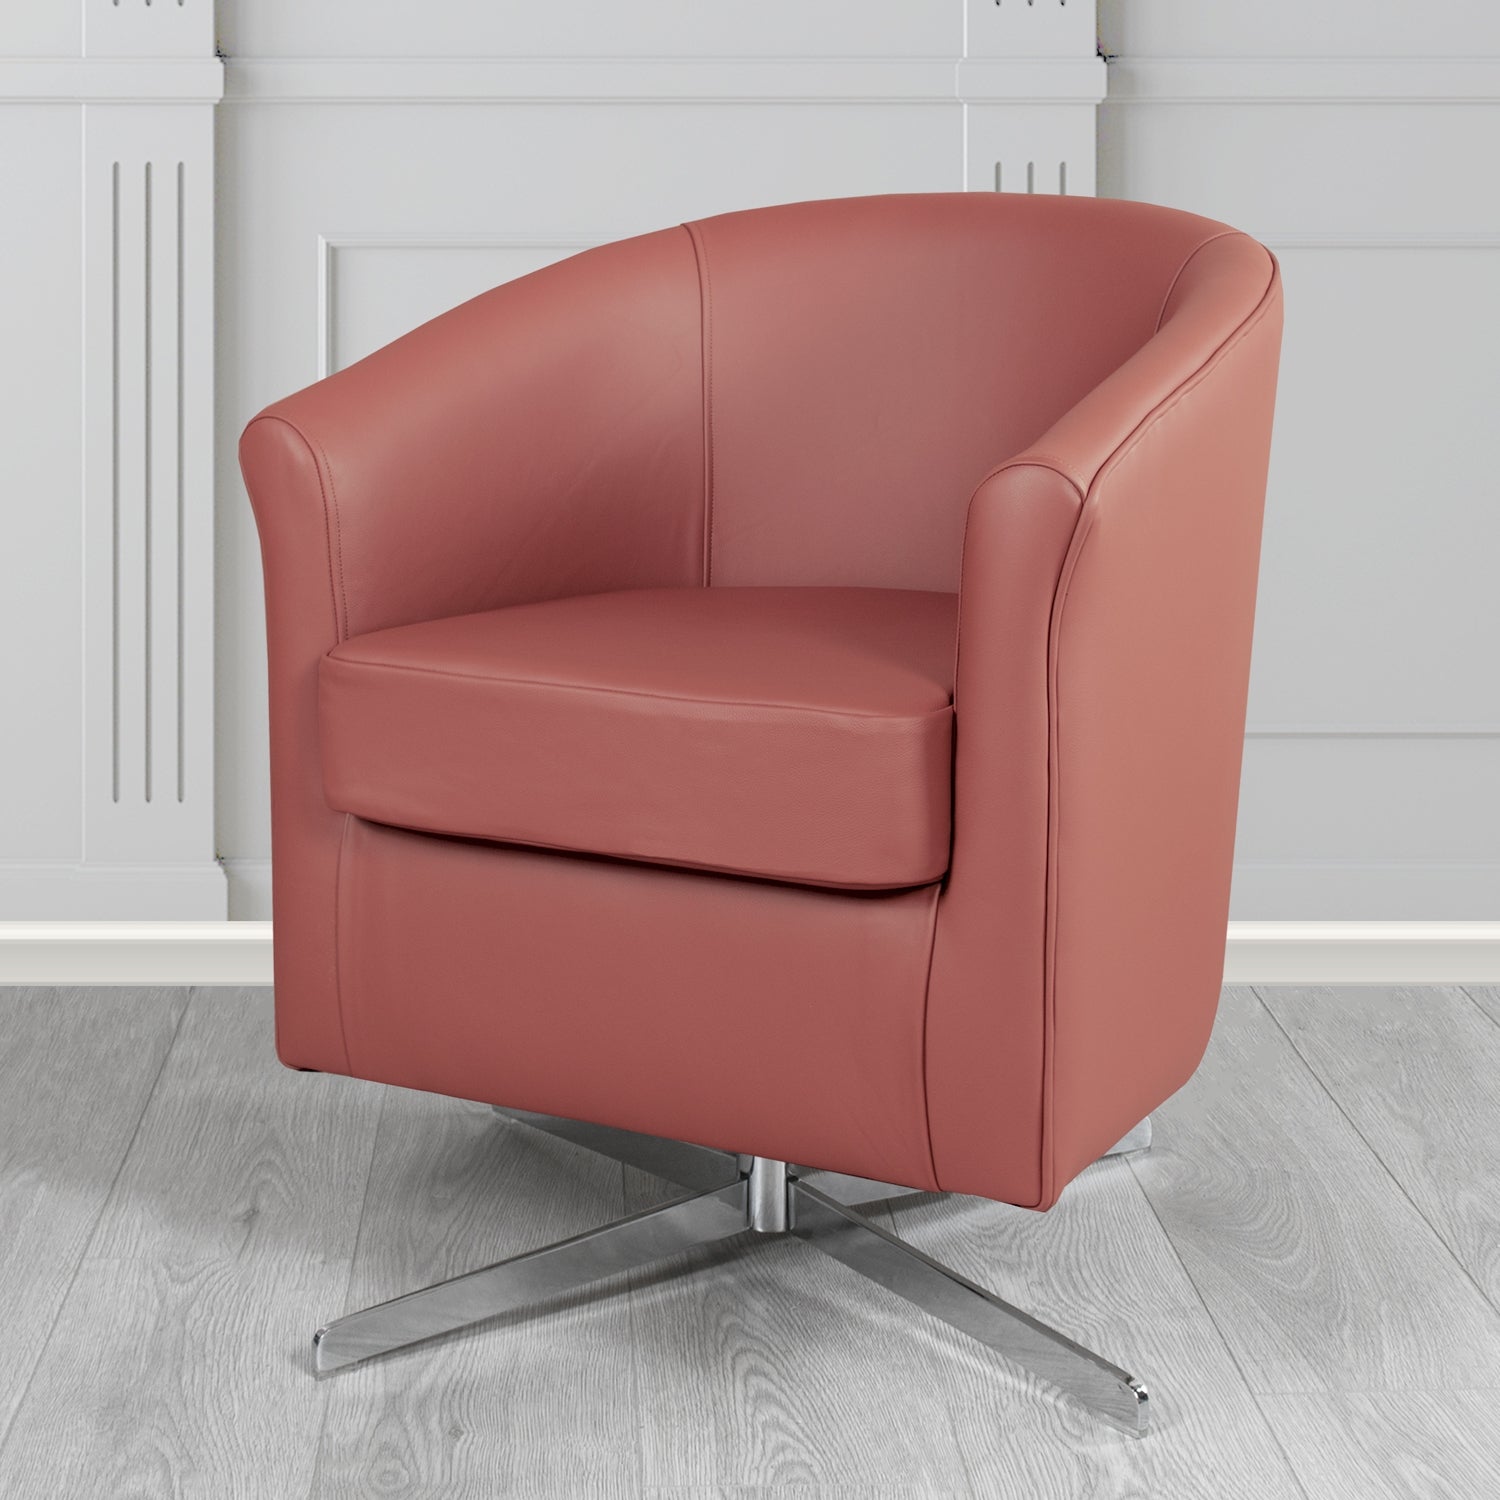 Cannes Swivel Tub Chair in Shelly West Crib 5 Genuine Leather - The Tub Chair Shop